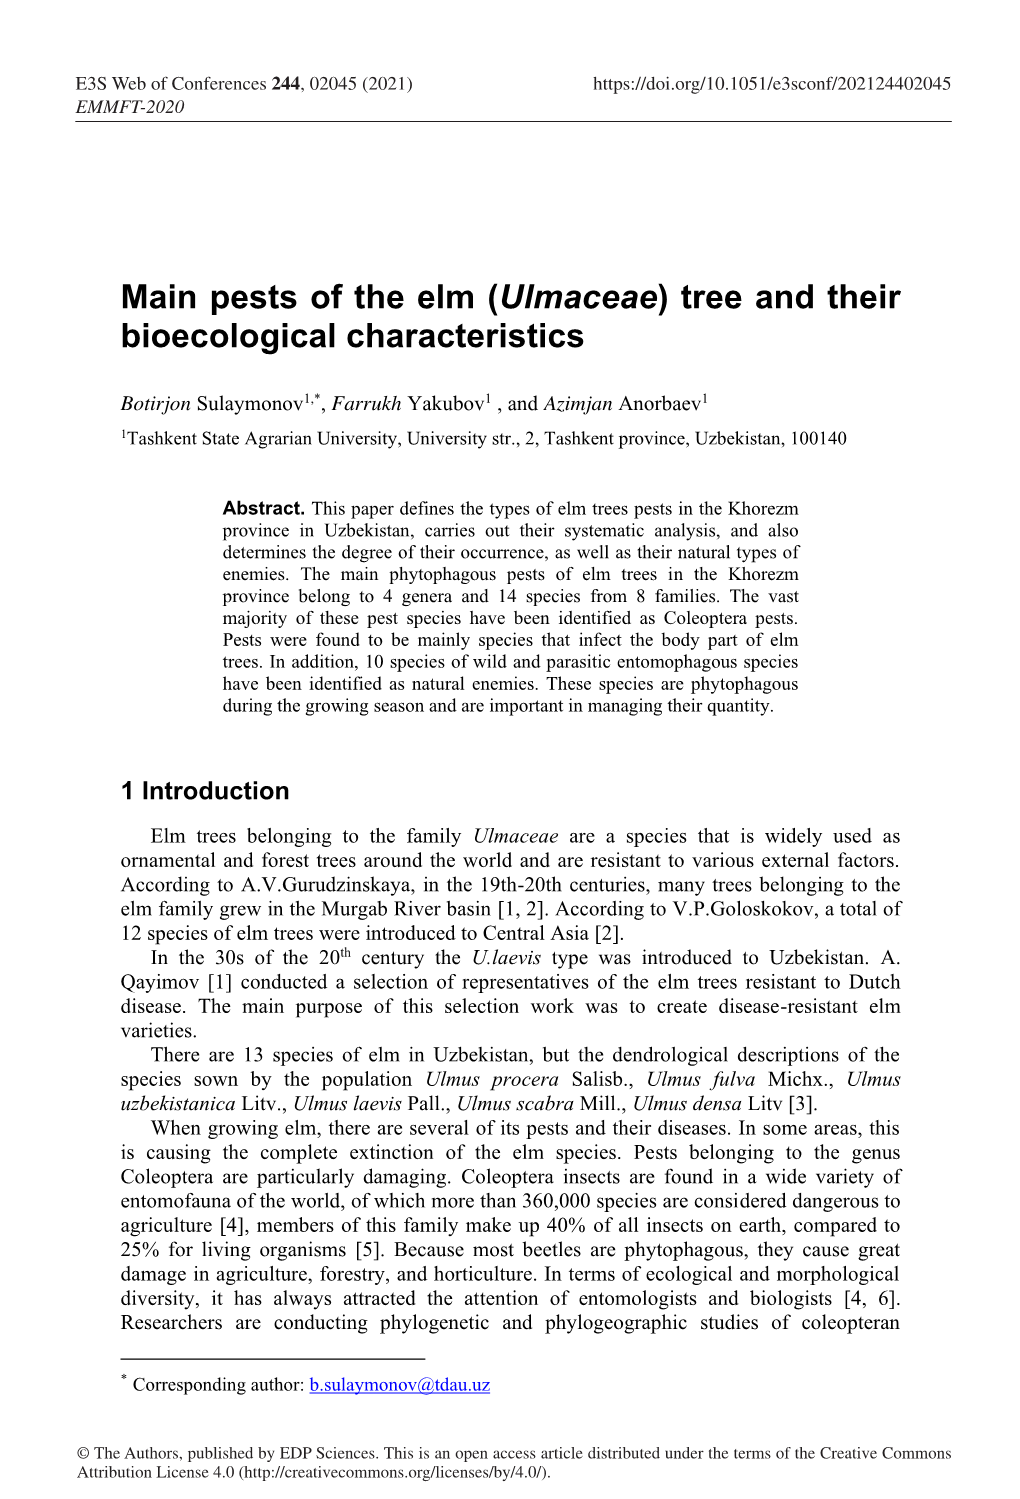 Pests of the Elm (Ulmaceae) Tree and Their Bioecological Characteristics